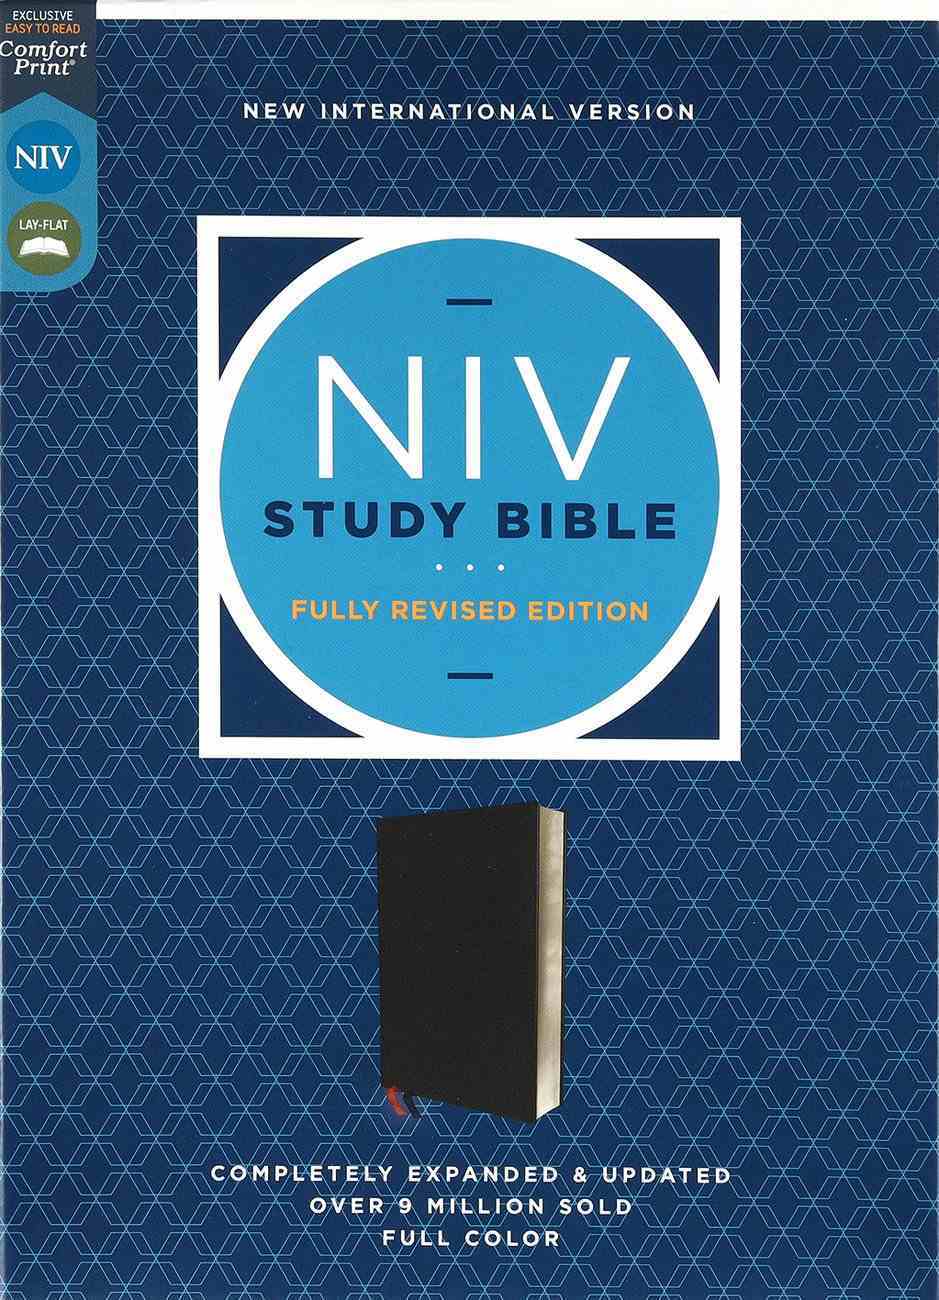 NIV Study Bible Black (Red Letter Edition) Fully Revised Edition (2020) Bonded Leather